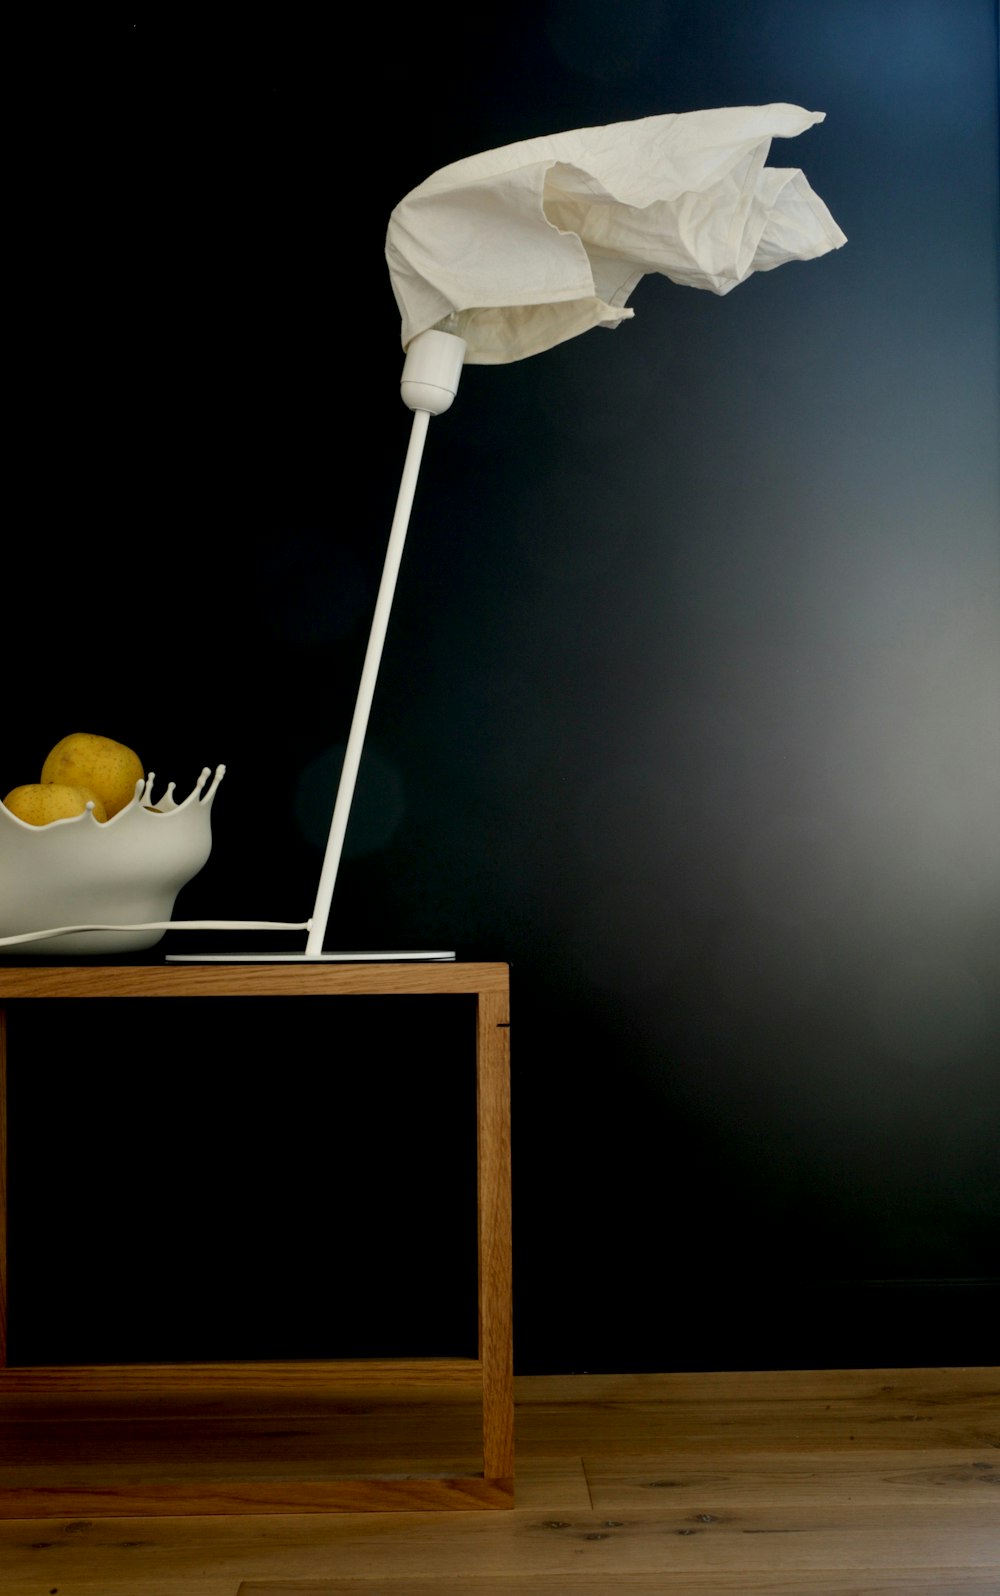 a bowl of lemons and an umbrella on a table